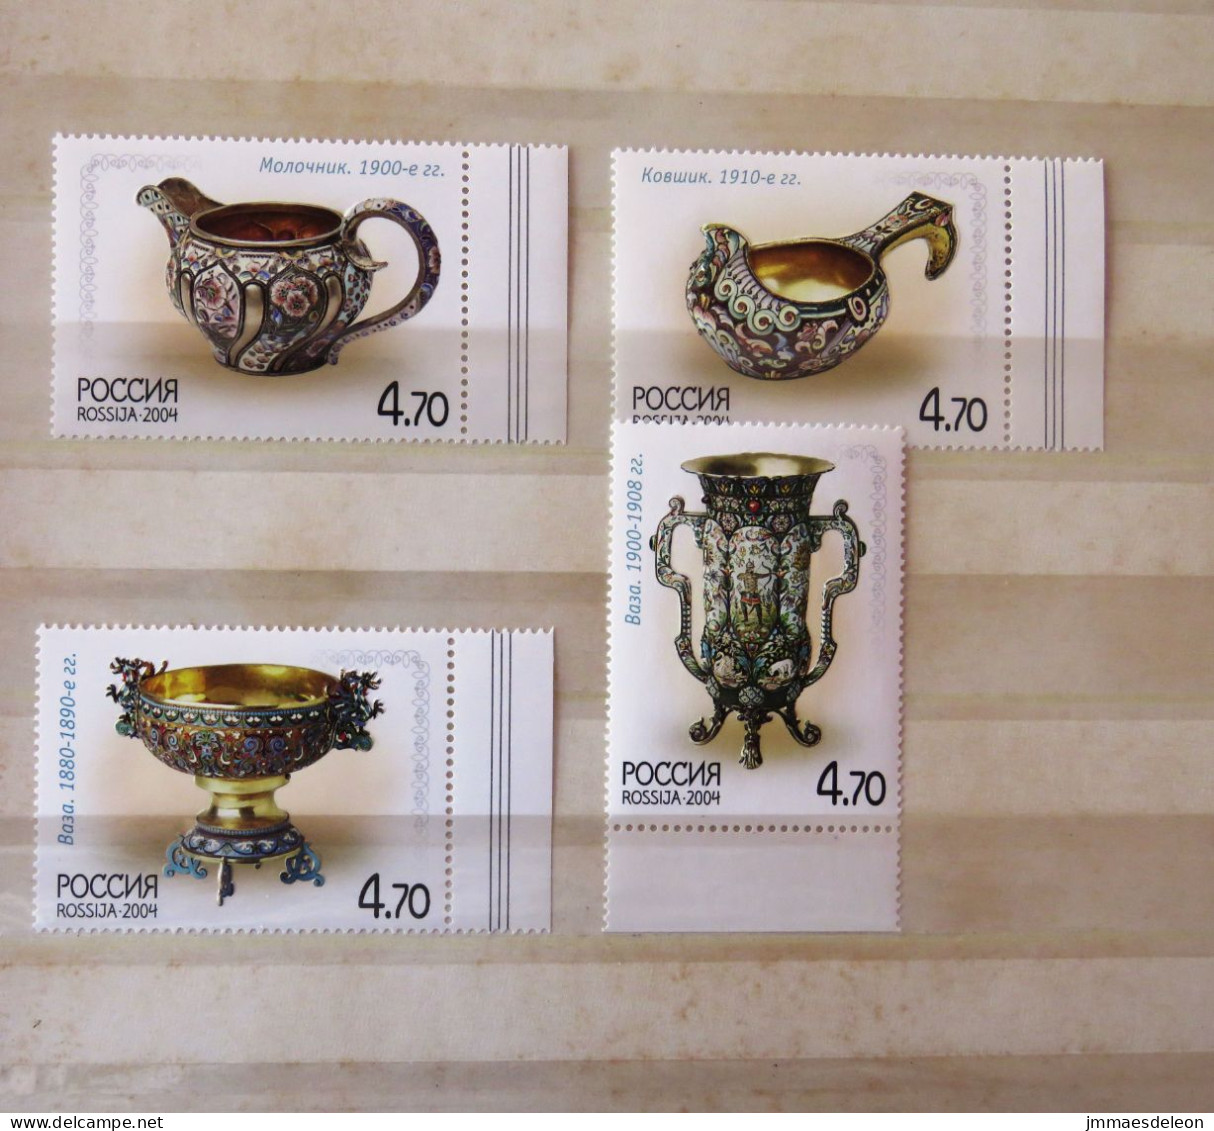 Russia 2004 Table Ware Mint Set Embossed Stamps - Used Stamps